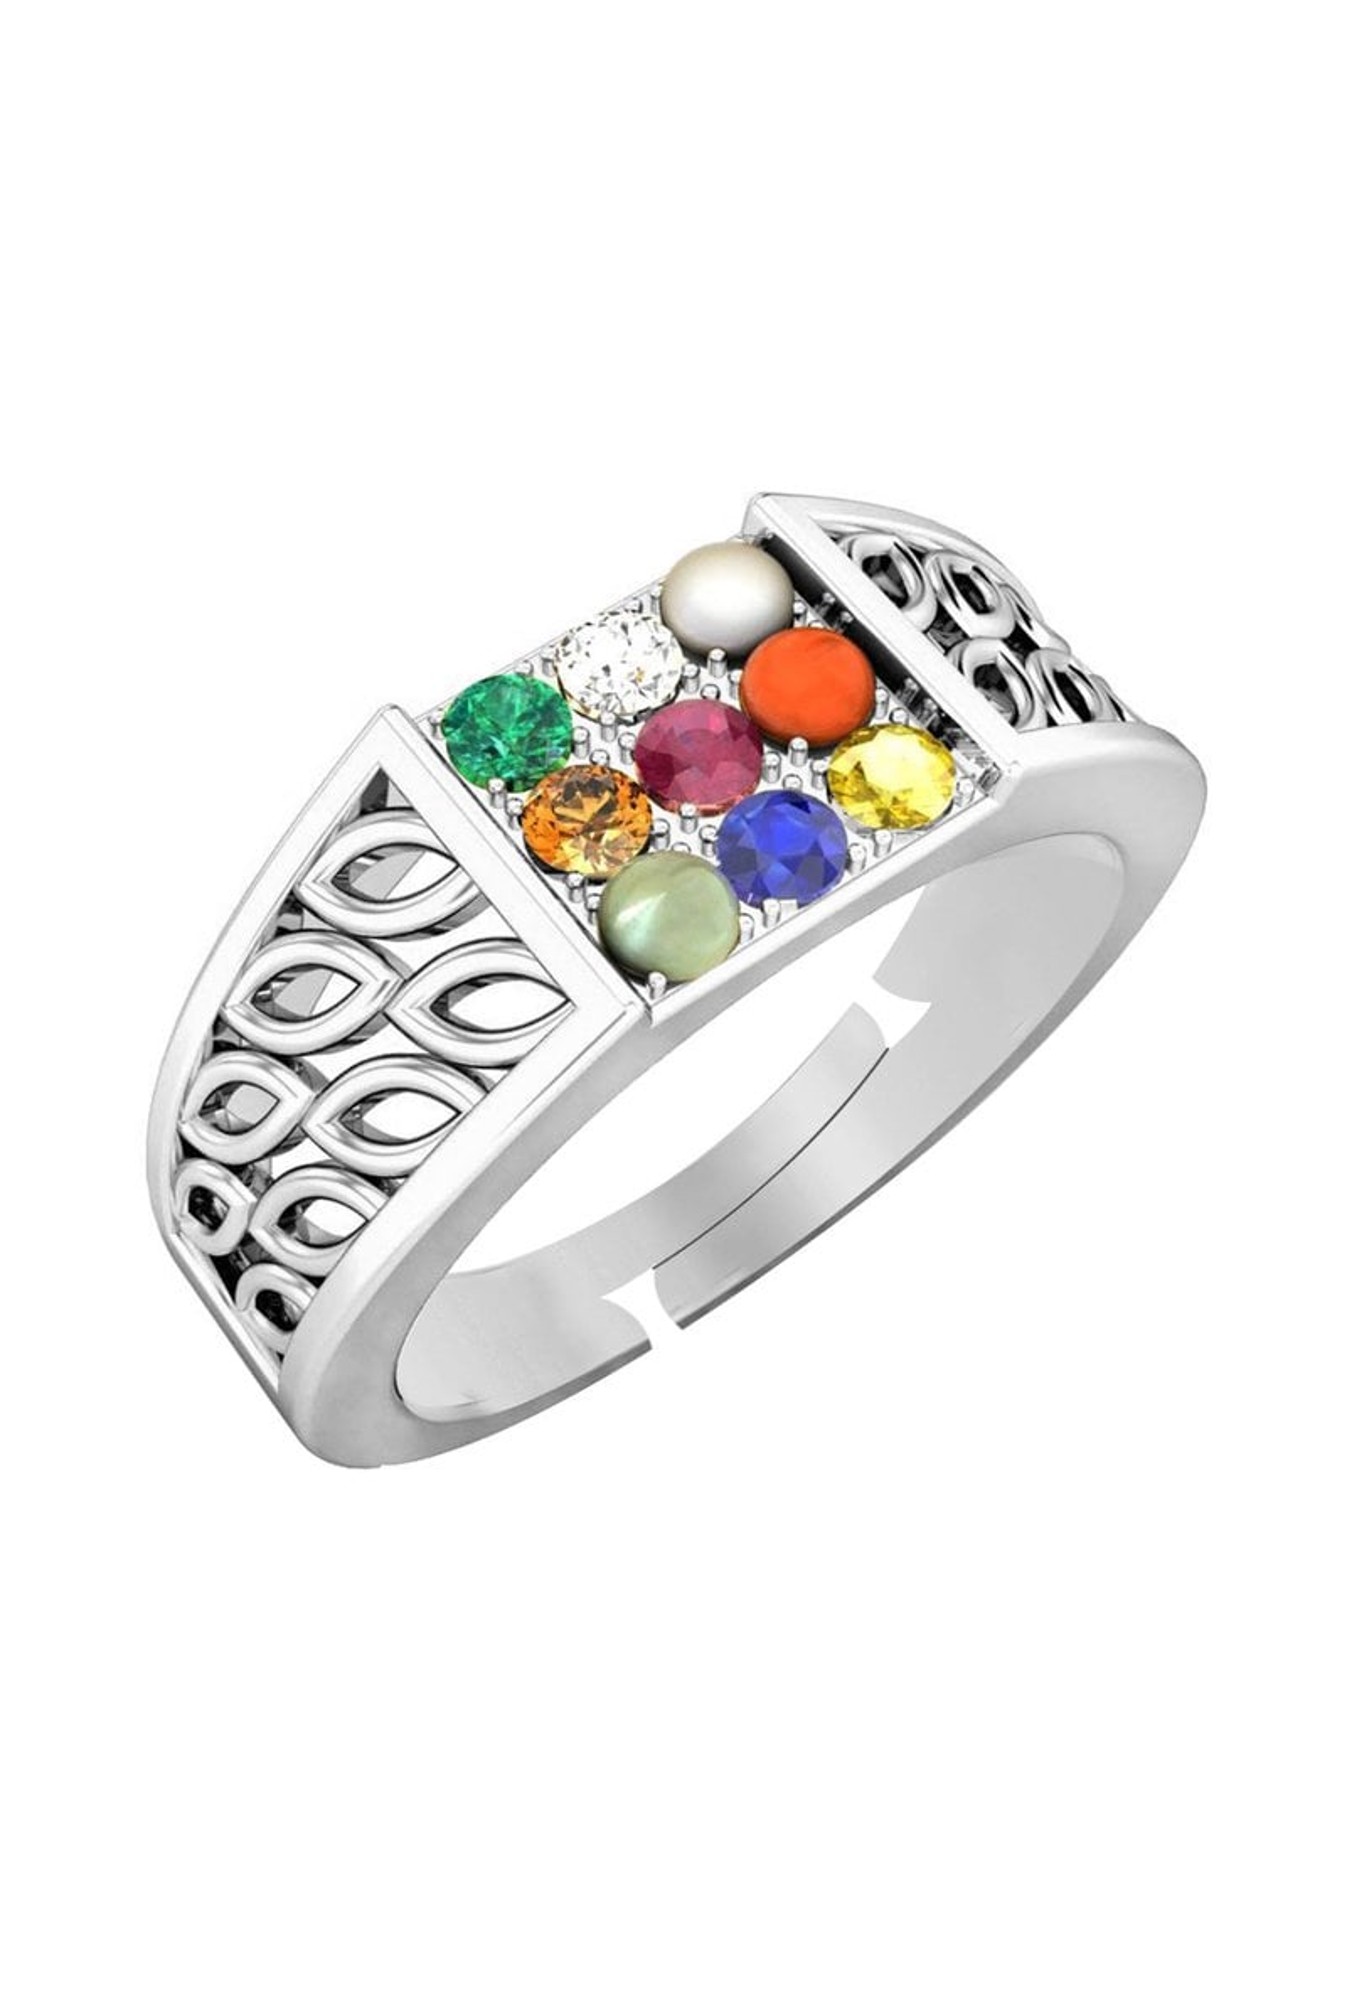 Jaipur Gemstone Navratna Ring For Girls With natural stones Stone Crystal  Copper Plated Ring Price in India - Buy Jaipur Gemstone Navratna Ring For  Girls With natural stones Stone Crystal Copper Plated